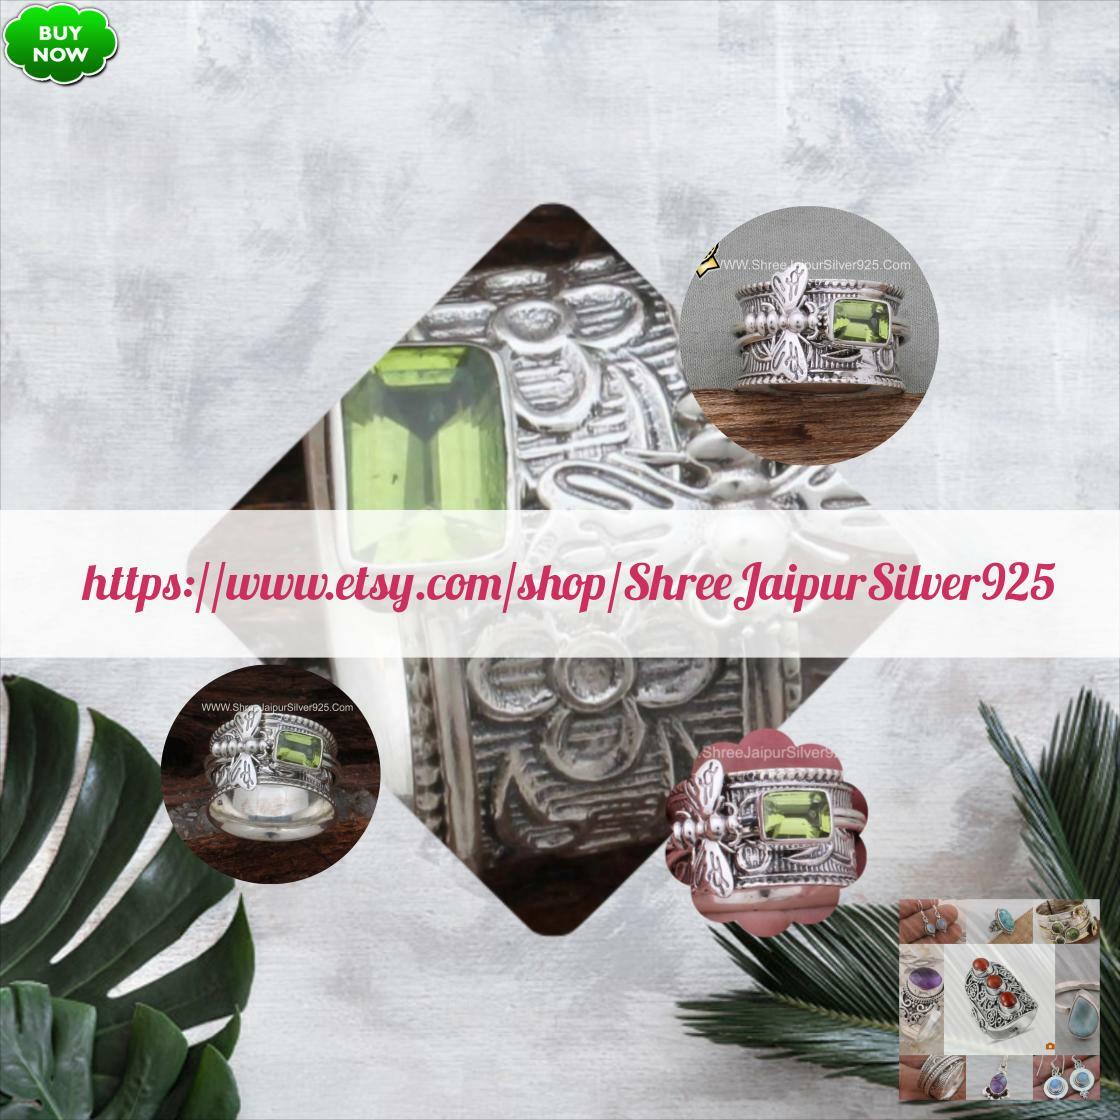 🐕 Big deals! Solid 925 Sterling Silver Peridot Stone Spinner Ring For Women Handmade Silver Honey Bee Peridot November Birthstone Ring For Wedding Gift only at $59.0 on etsy.com/listing/129431… Hurry. #BohemianRing #SilverSpinnerRing